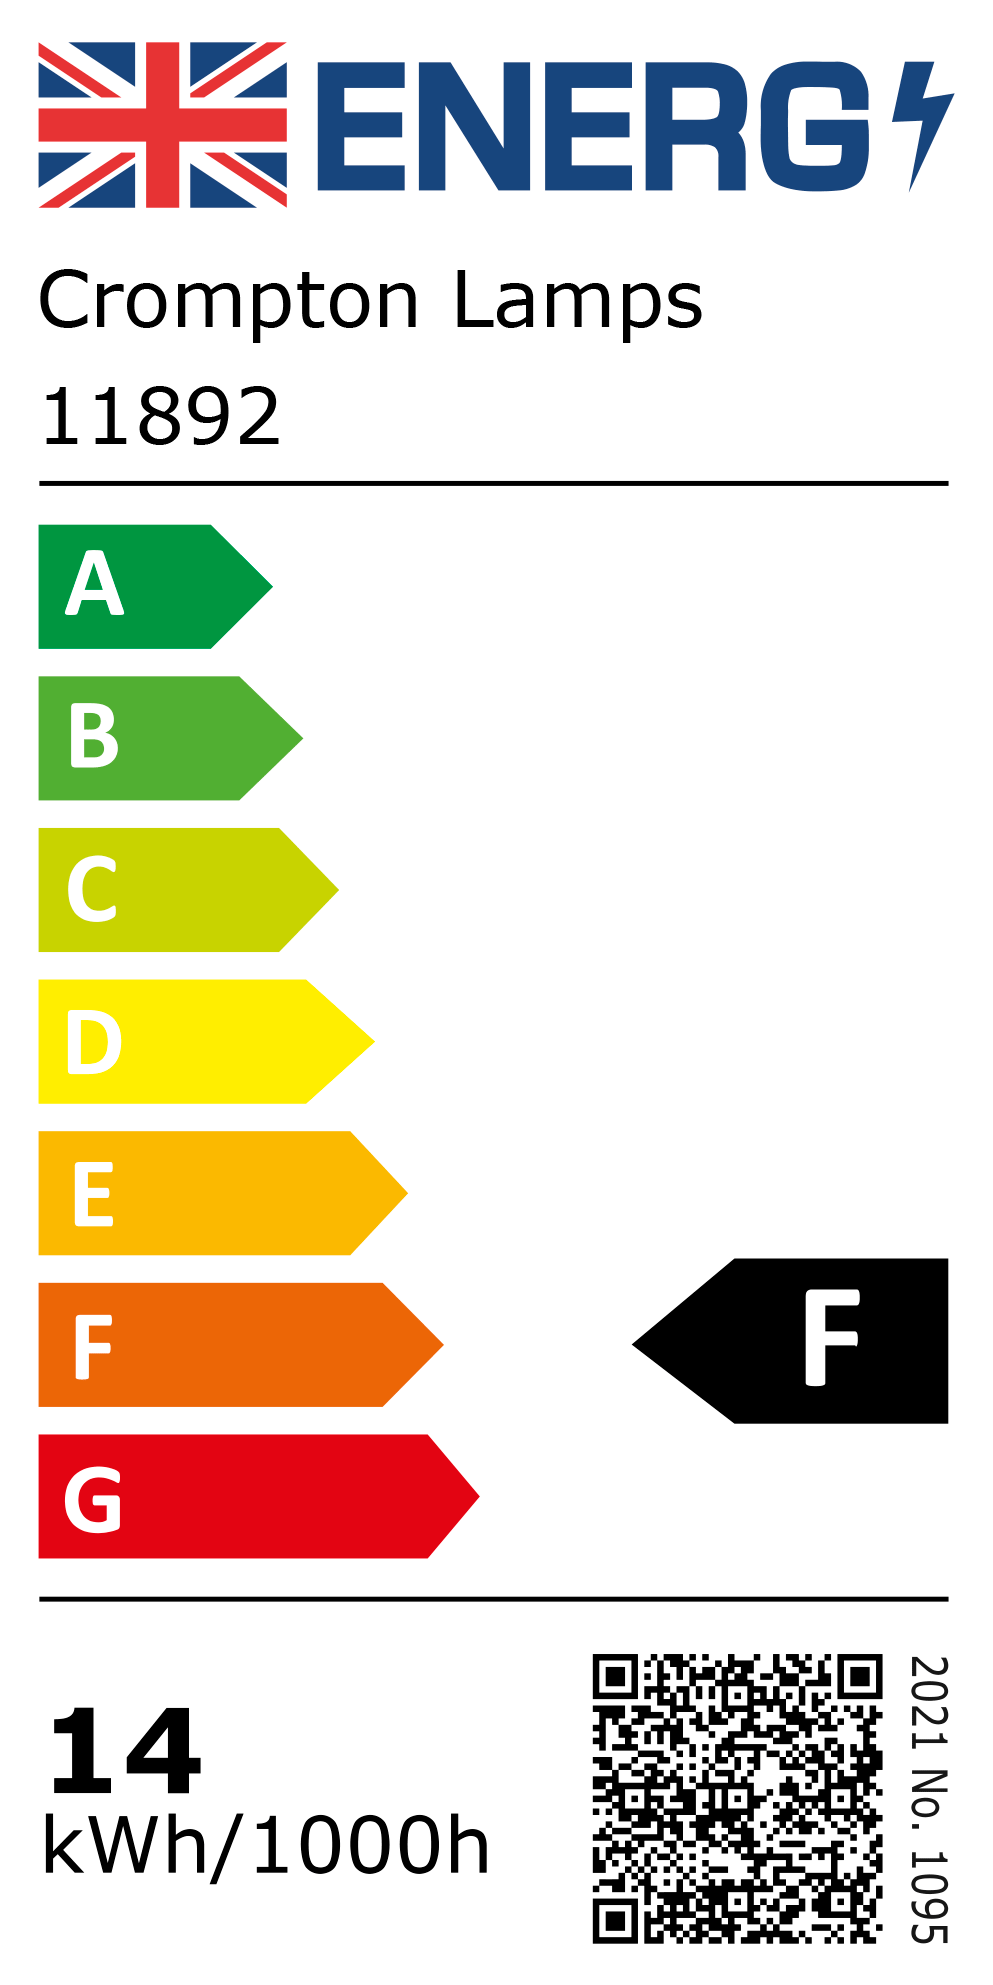 New 2021 Energy Rating Label: Stock Code 11892